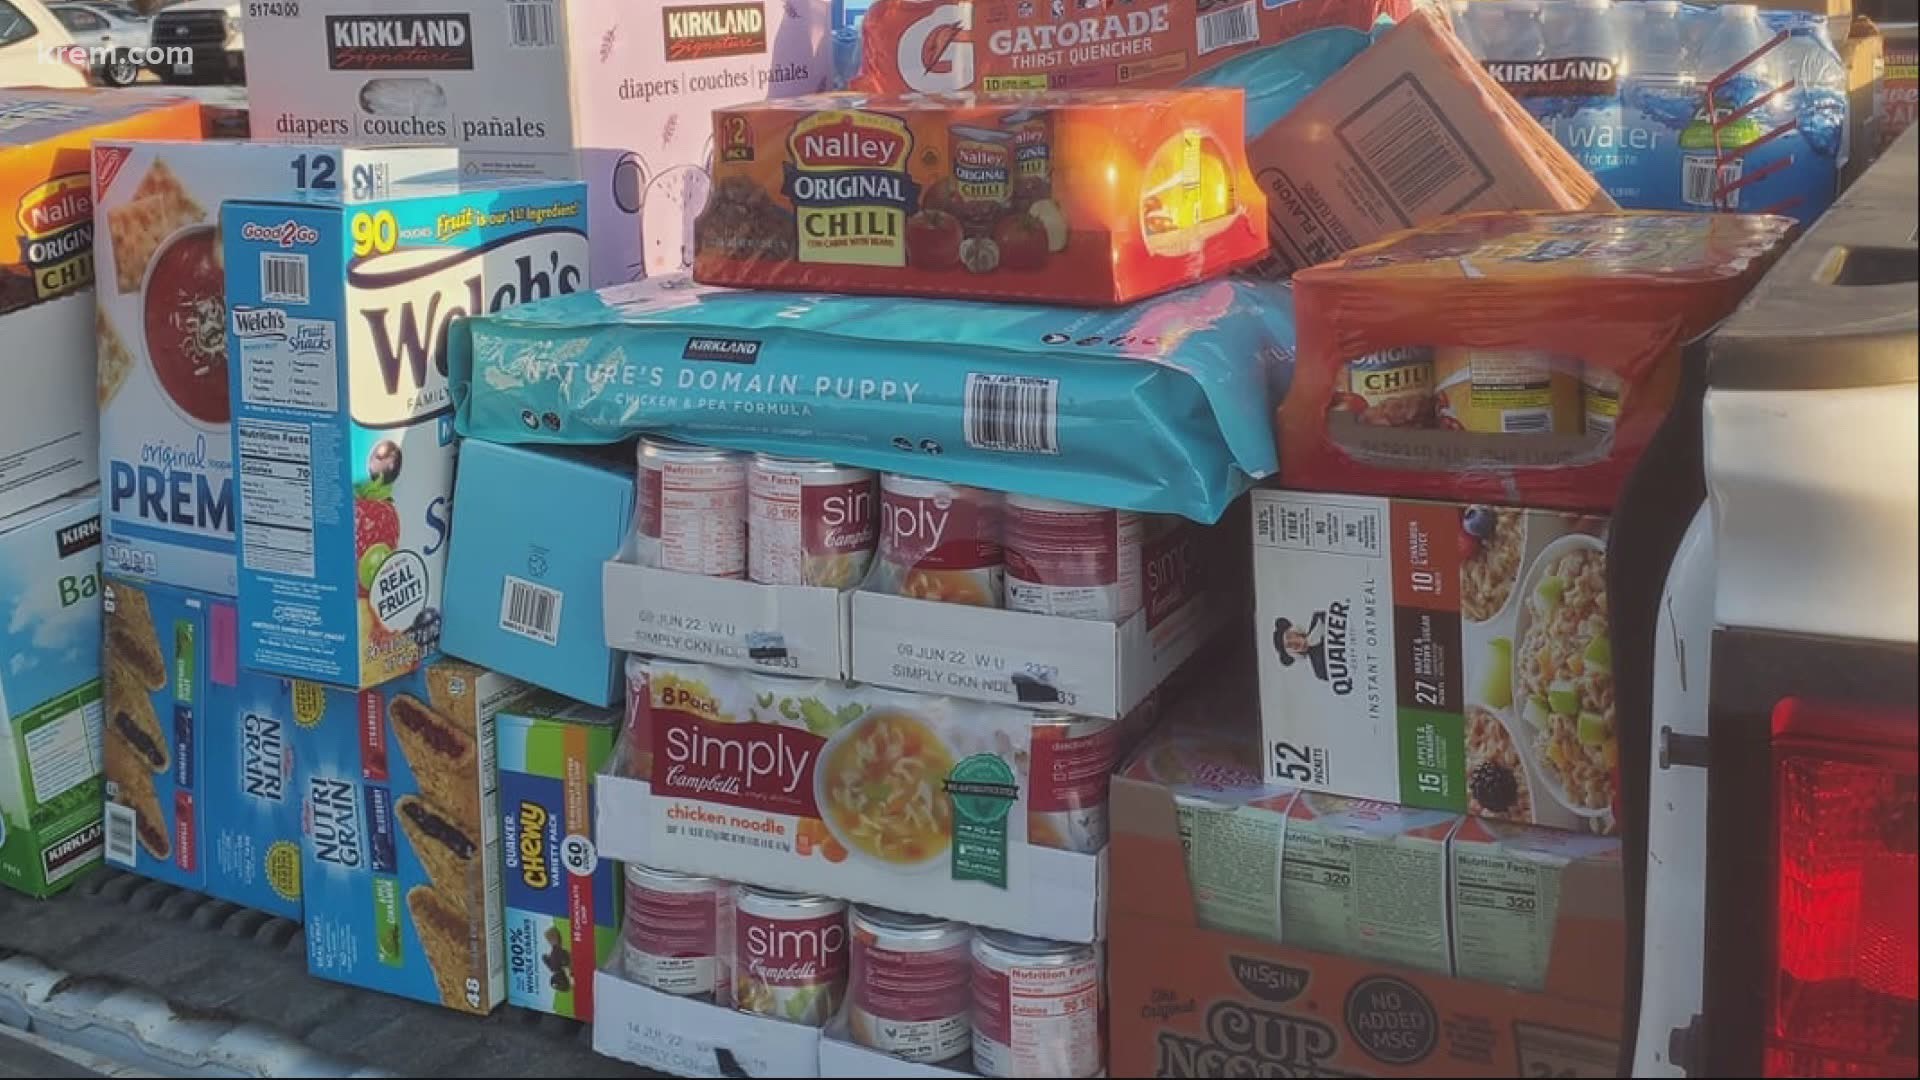 A Spokane man raises money, and supplies for families in need in North Central Washington.